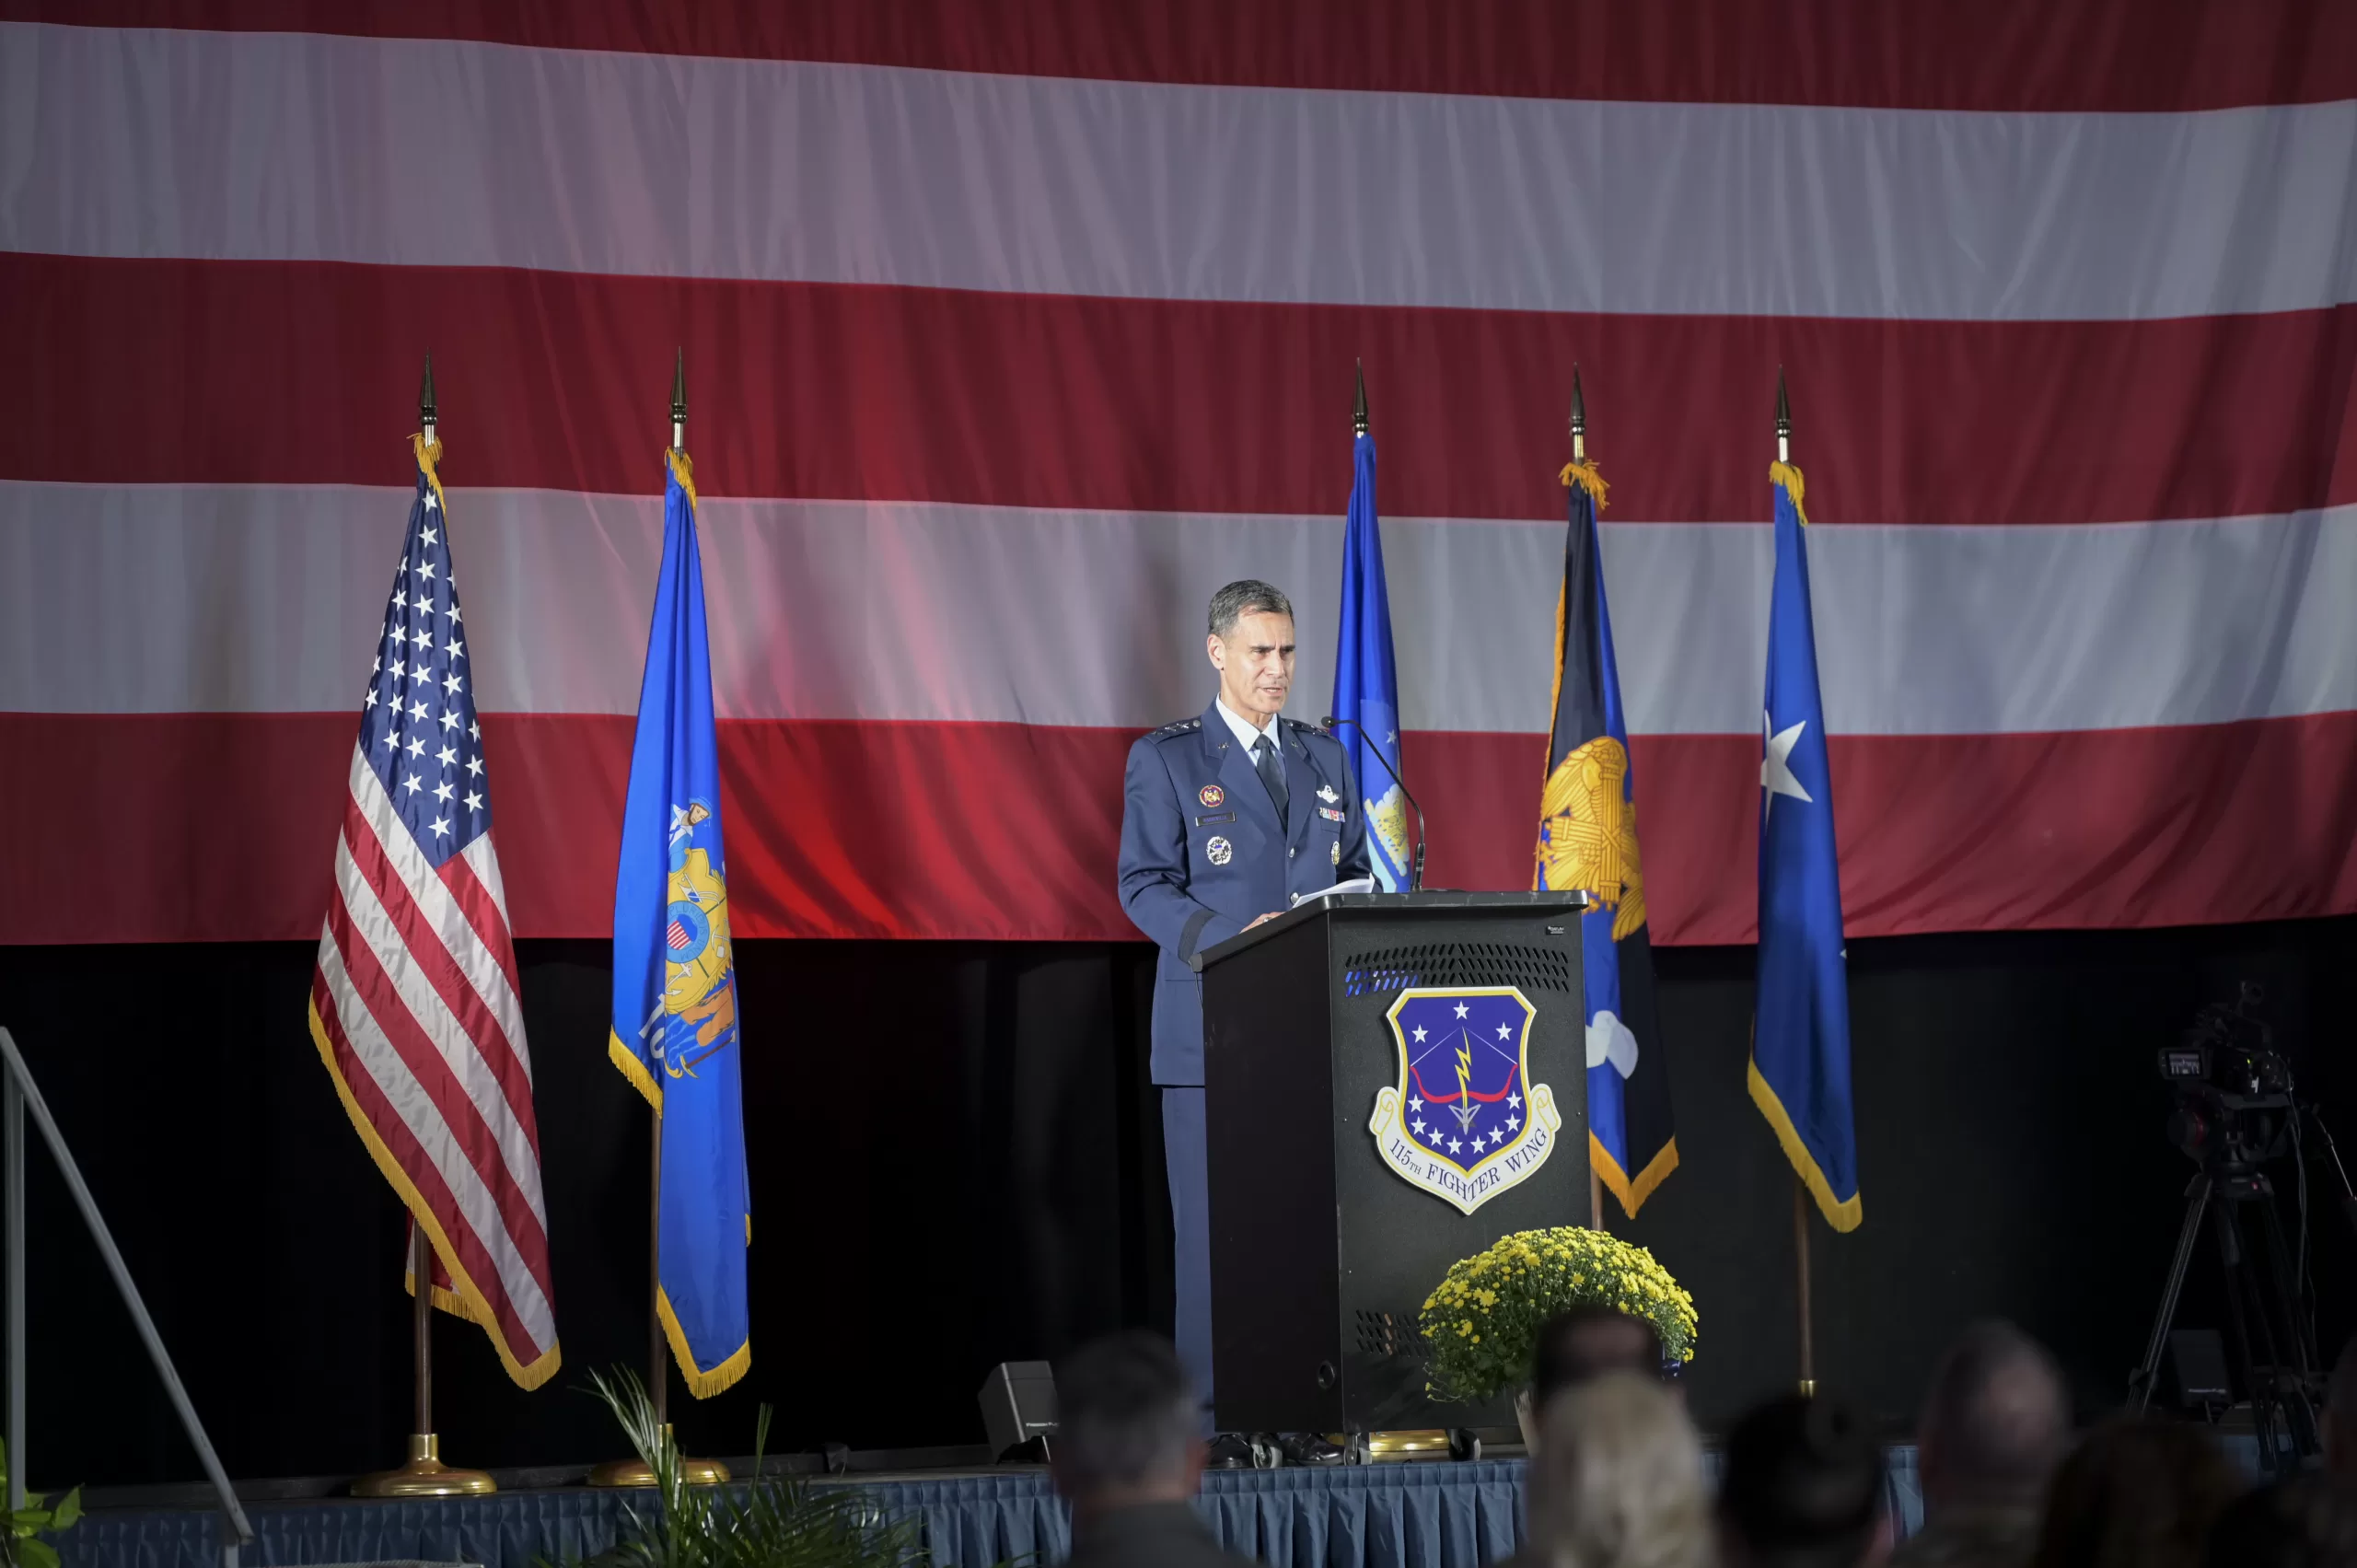  Lt. Gen. Marc Sassseville, Vice Chief of the National Guard Bureau, speaks during a Sept. 7 ceremony at the Wisconsin Air National Guard’s 115th Fighter Wing in Madison, Wis., to commemorate the fighter wing formally accepting the F-35 Lightning II mission. The 115th is only the second Air National Guard to field the 5th-generation fighter jet. 115th Fighter Wing photo by Tech. Sgt. Cameron Lewis